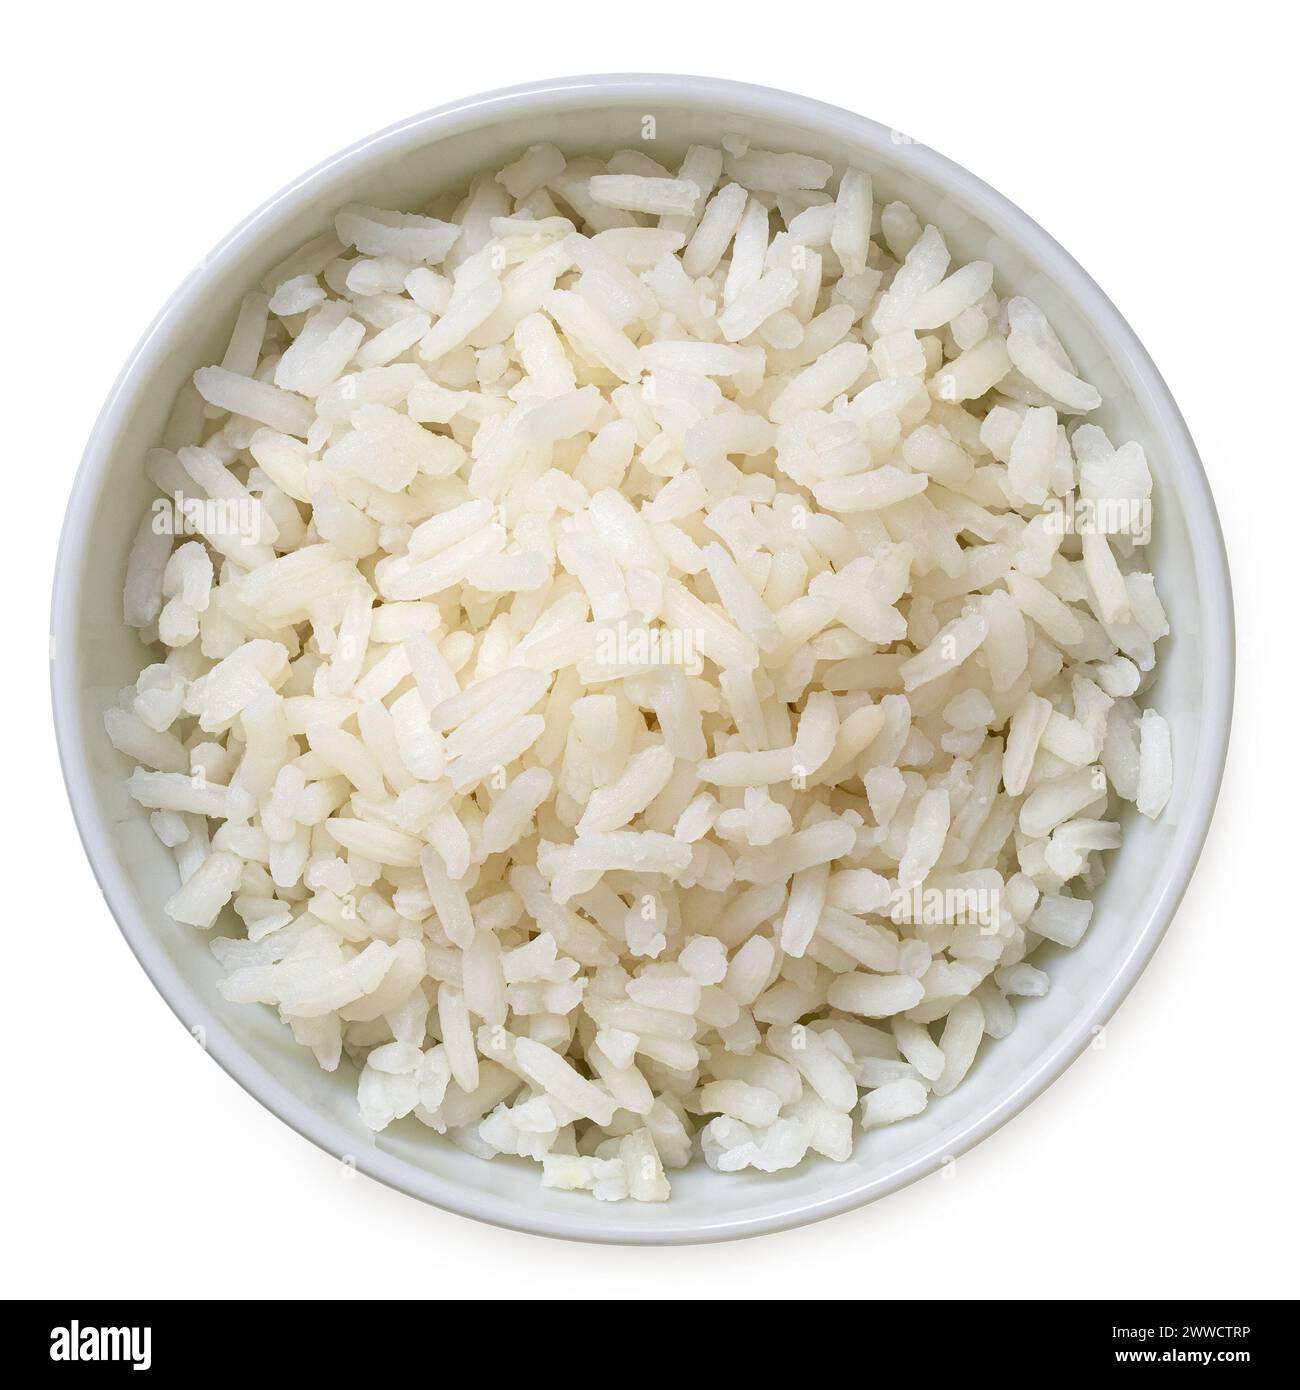 Cooked white rice in a white ceramic bowl isolated on white. Top view. Stock Photo